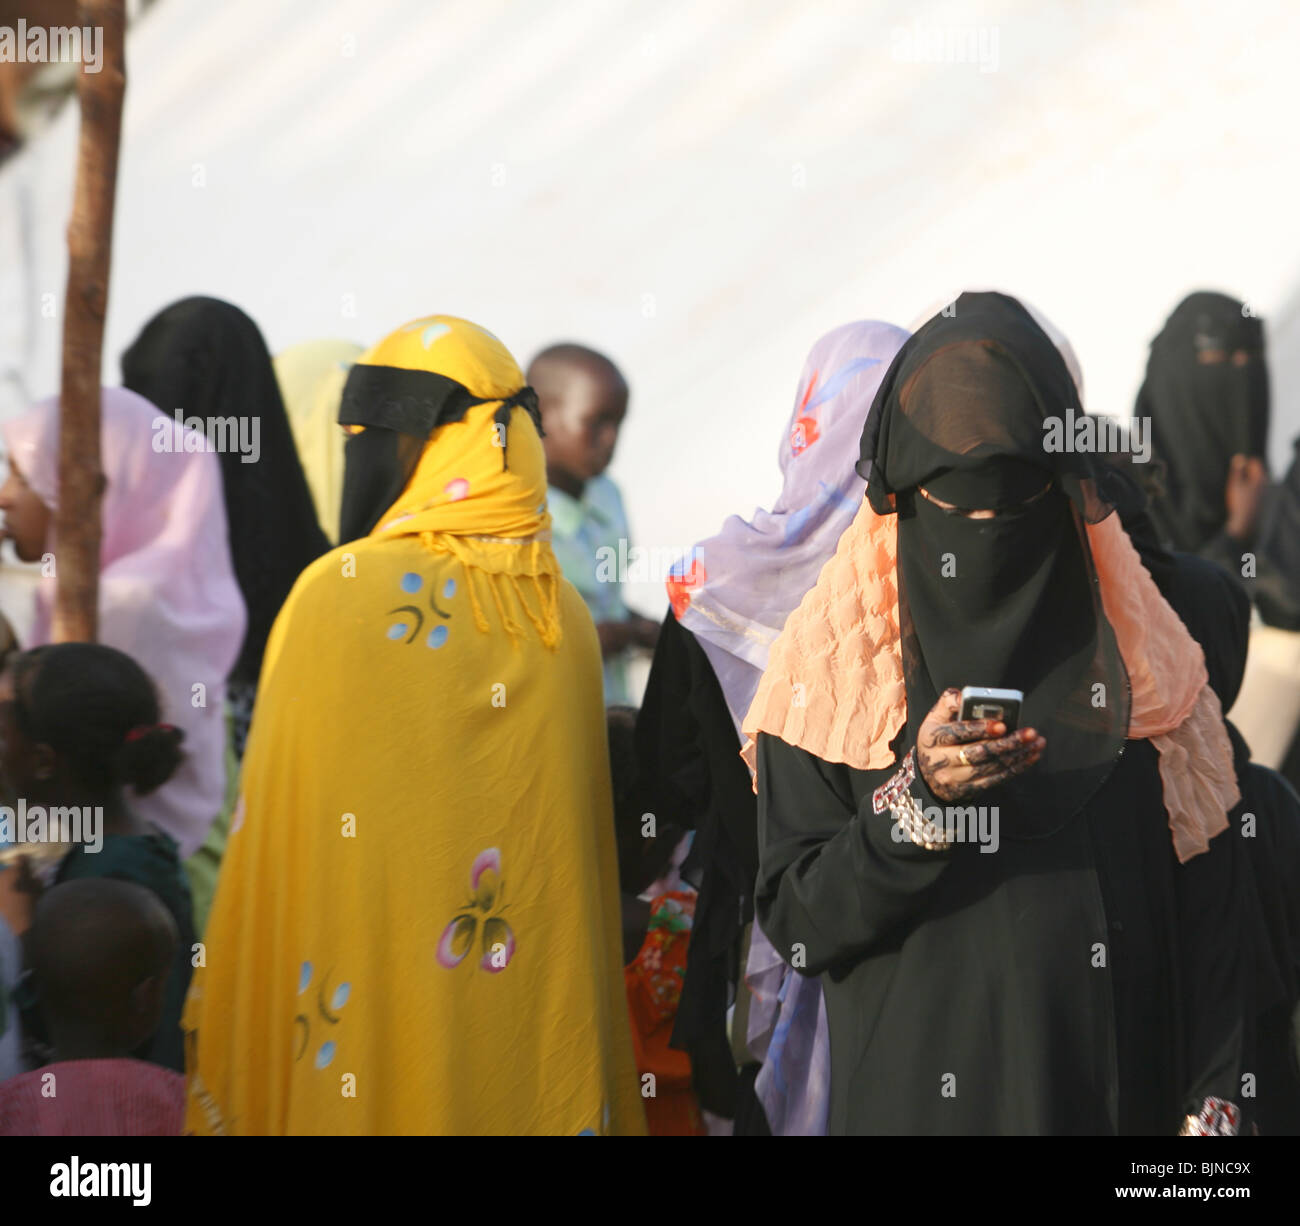 A Swahili woman checks her mobile phone during the traditional Maulidi festivities Stock Photo